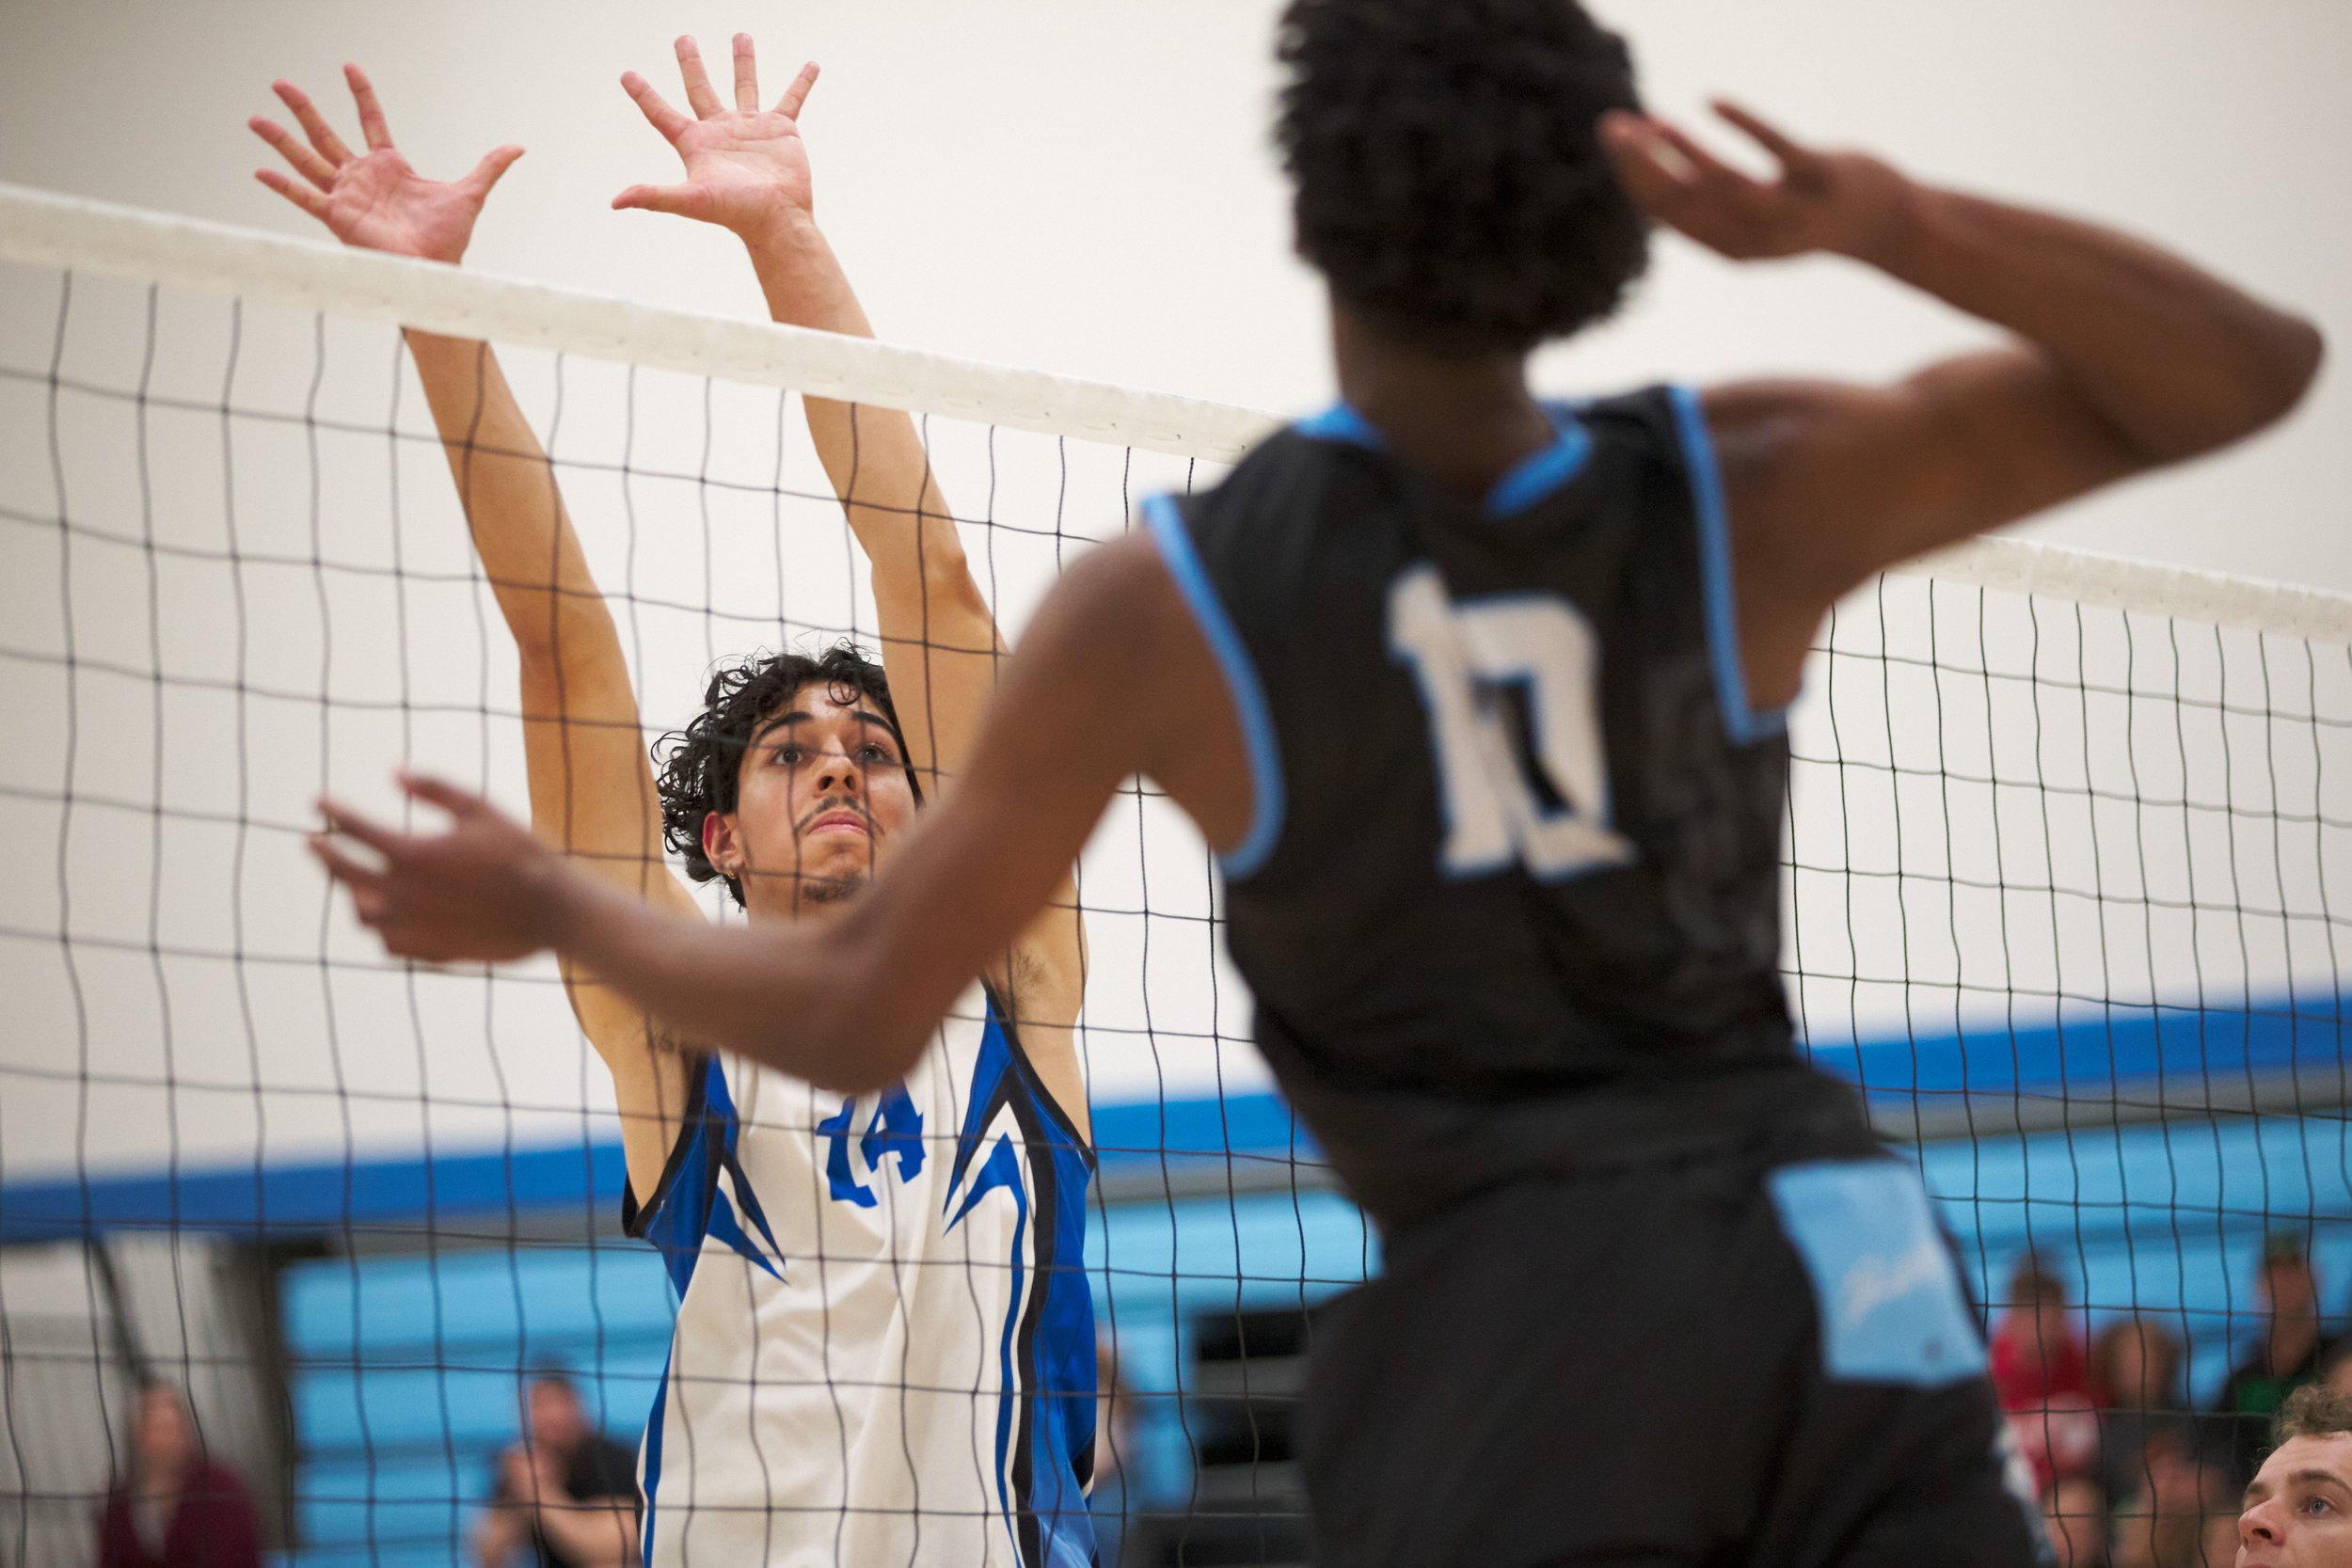  Santa Monica College Corsairs' Luis Garzon attempts to block an attack from Moorpark College Raiders' Ebba Tefera during the men's volleyball match on Friday, March 17, 2023, at Moorpark College's Gymnasium in Moorpark, Calif. The Corsairs lost 3-1.